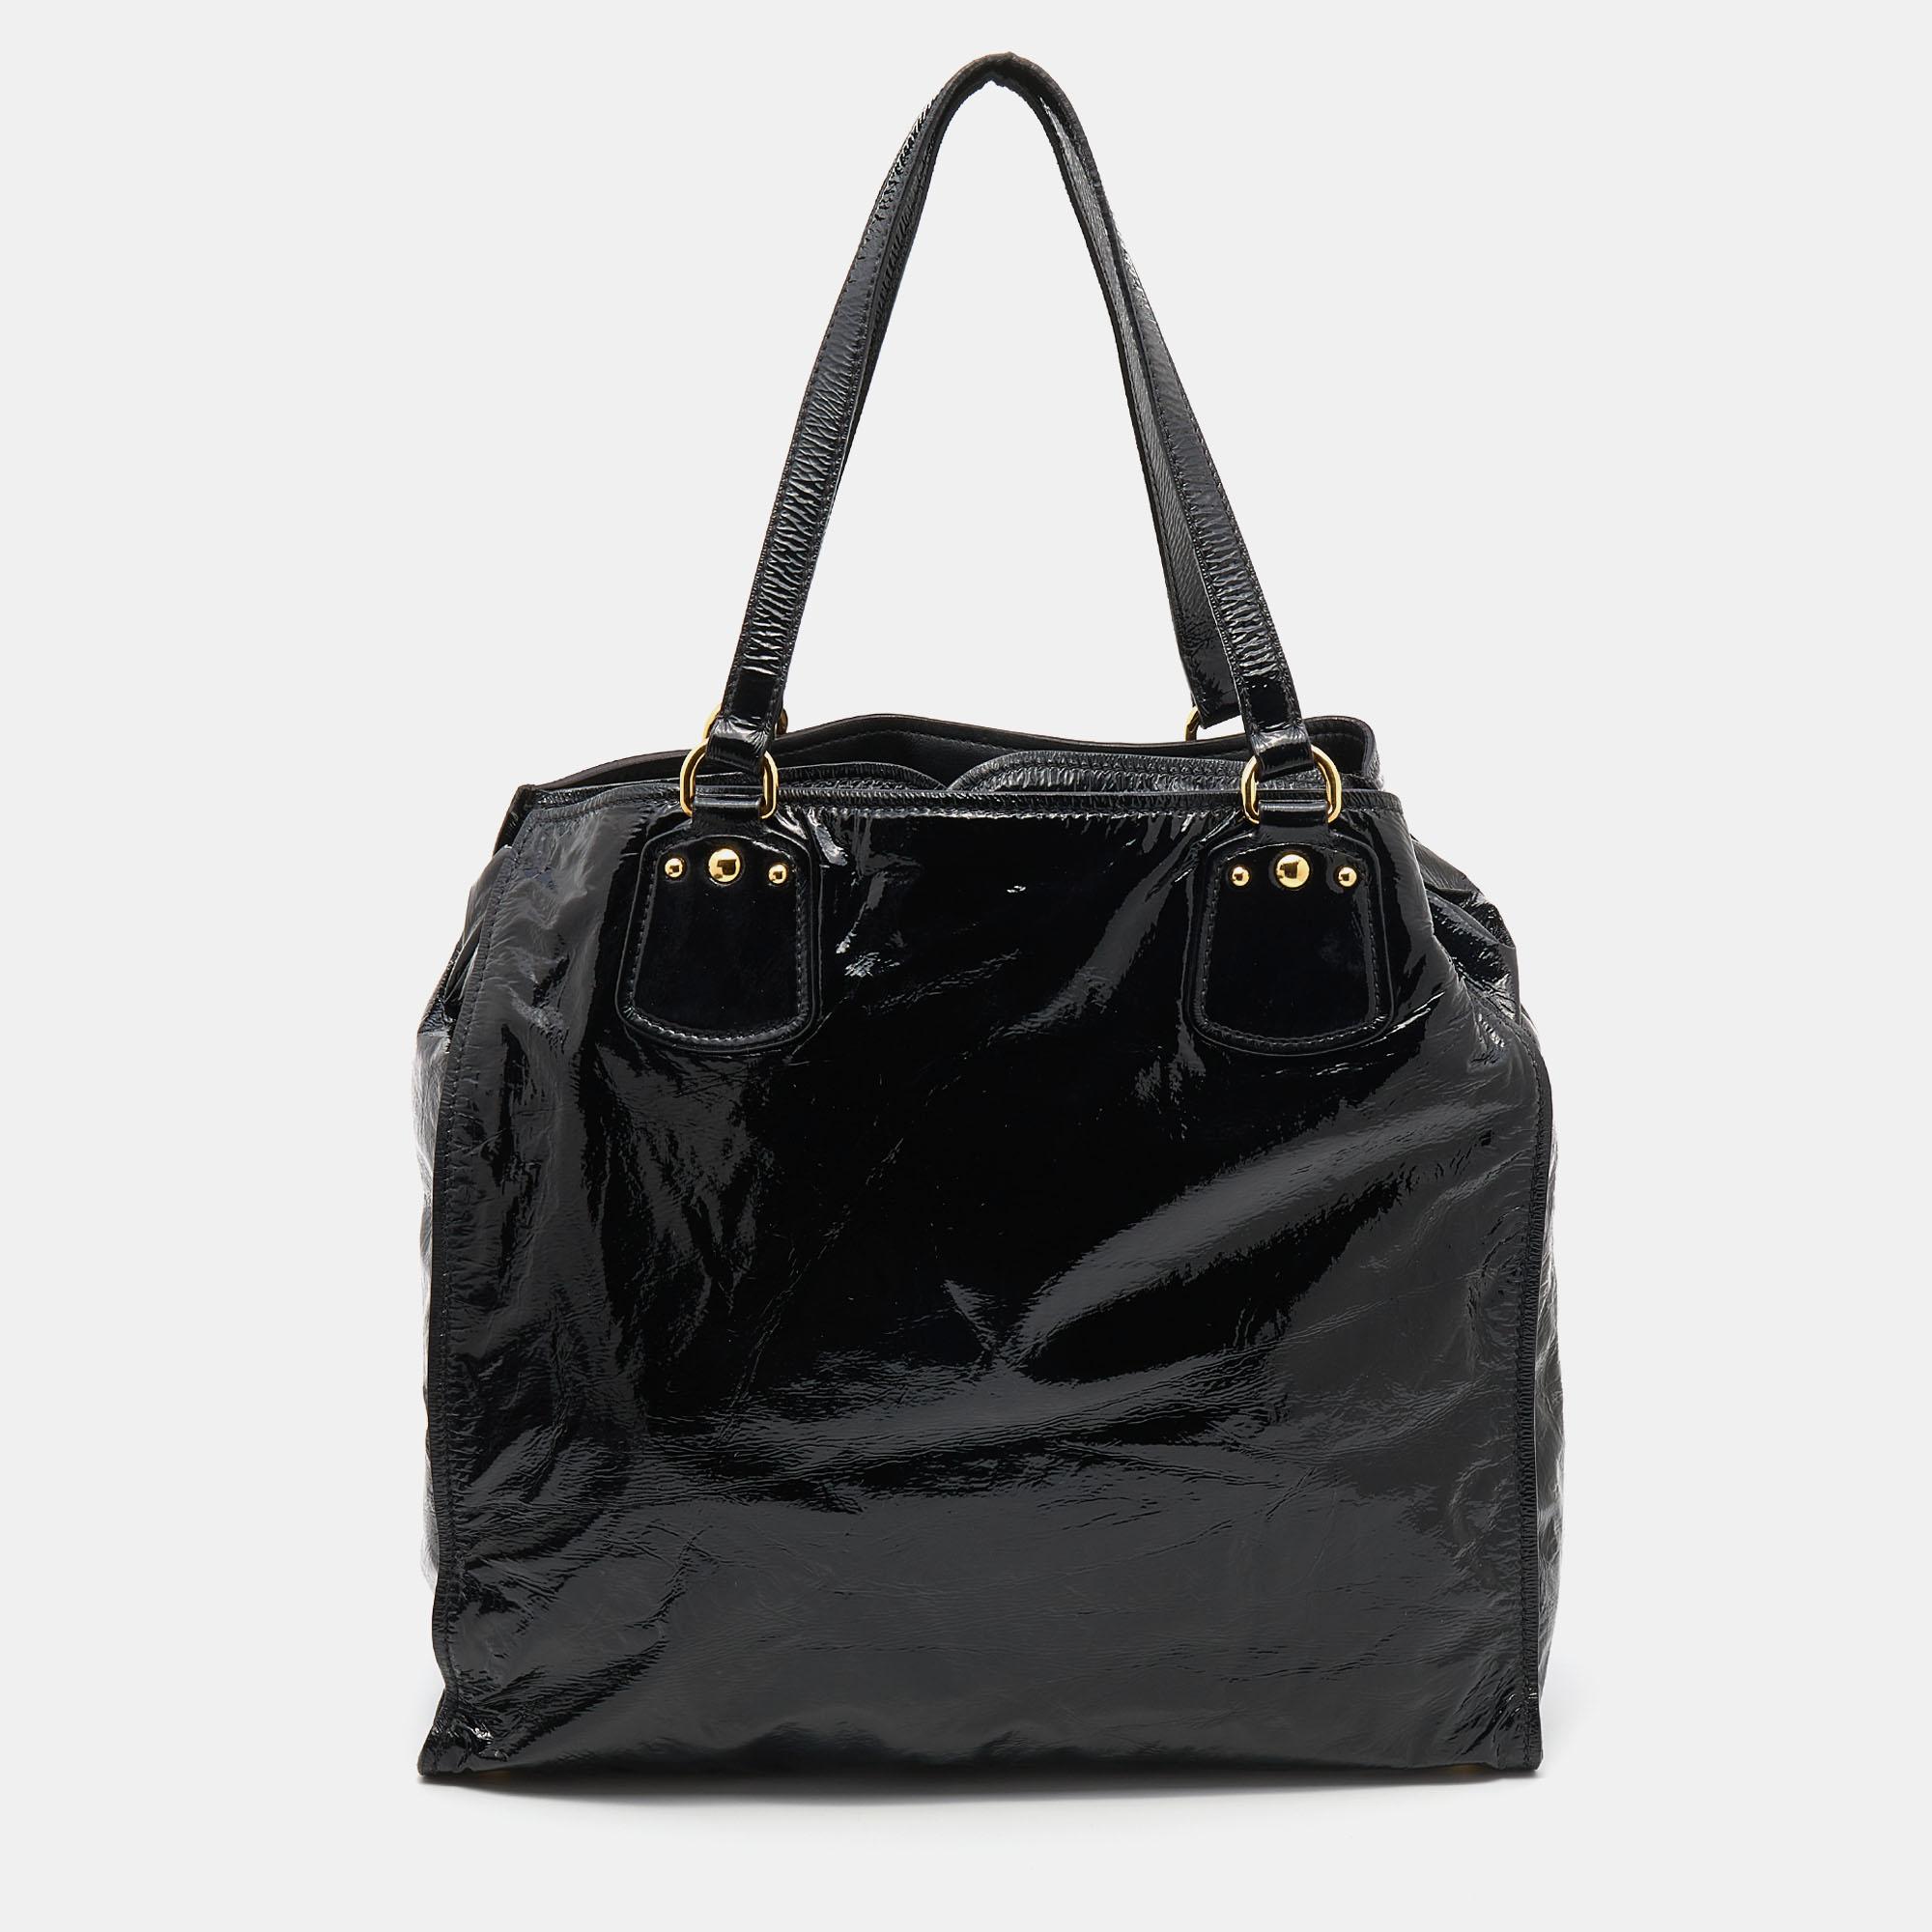 This tote by Miu Miu will remain a favorite in your wardrobe. It has been crafted using patent leather and equipped with two flat shoulder handles, gold-tone hardware, and a well-sized interior.

Includes: Original Dustbag